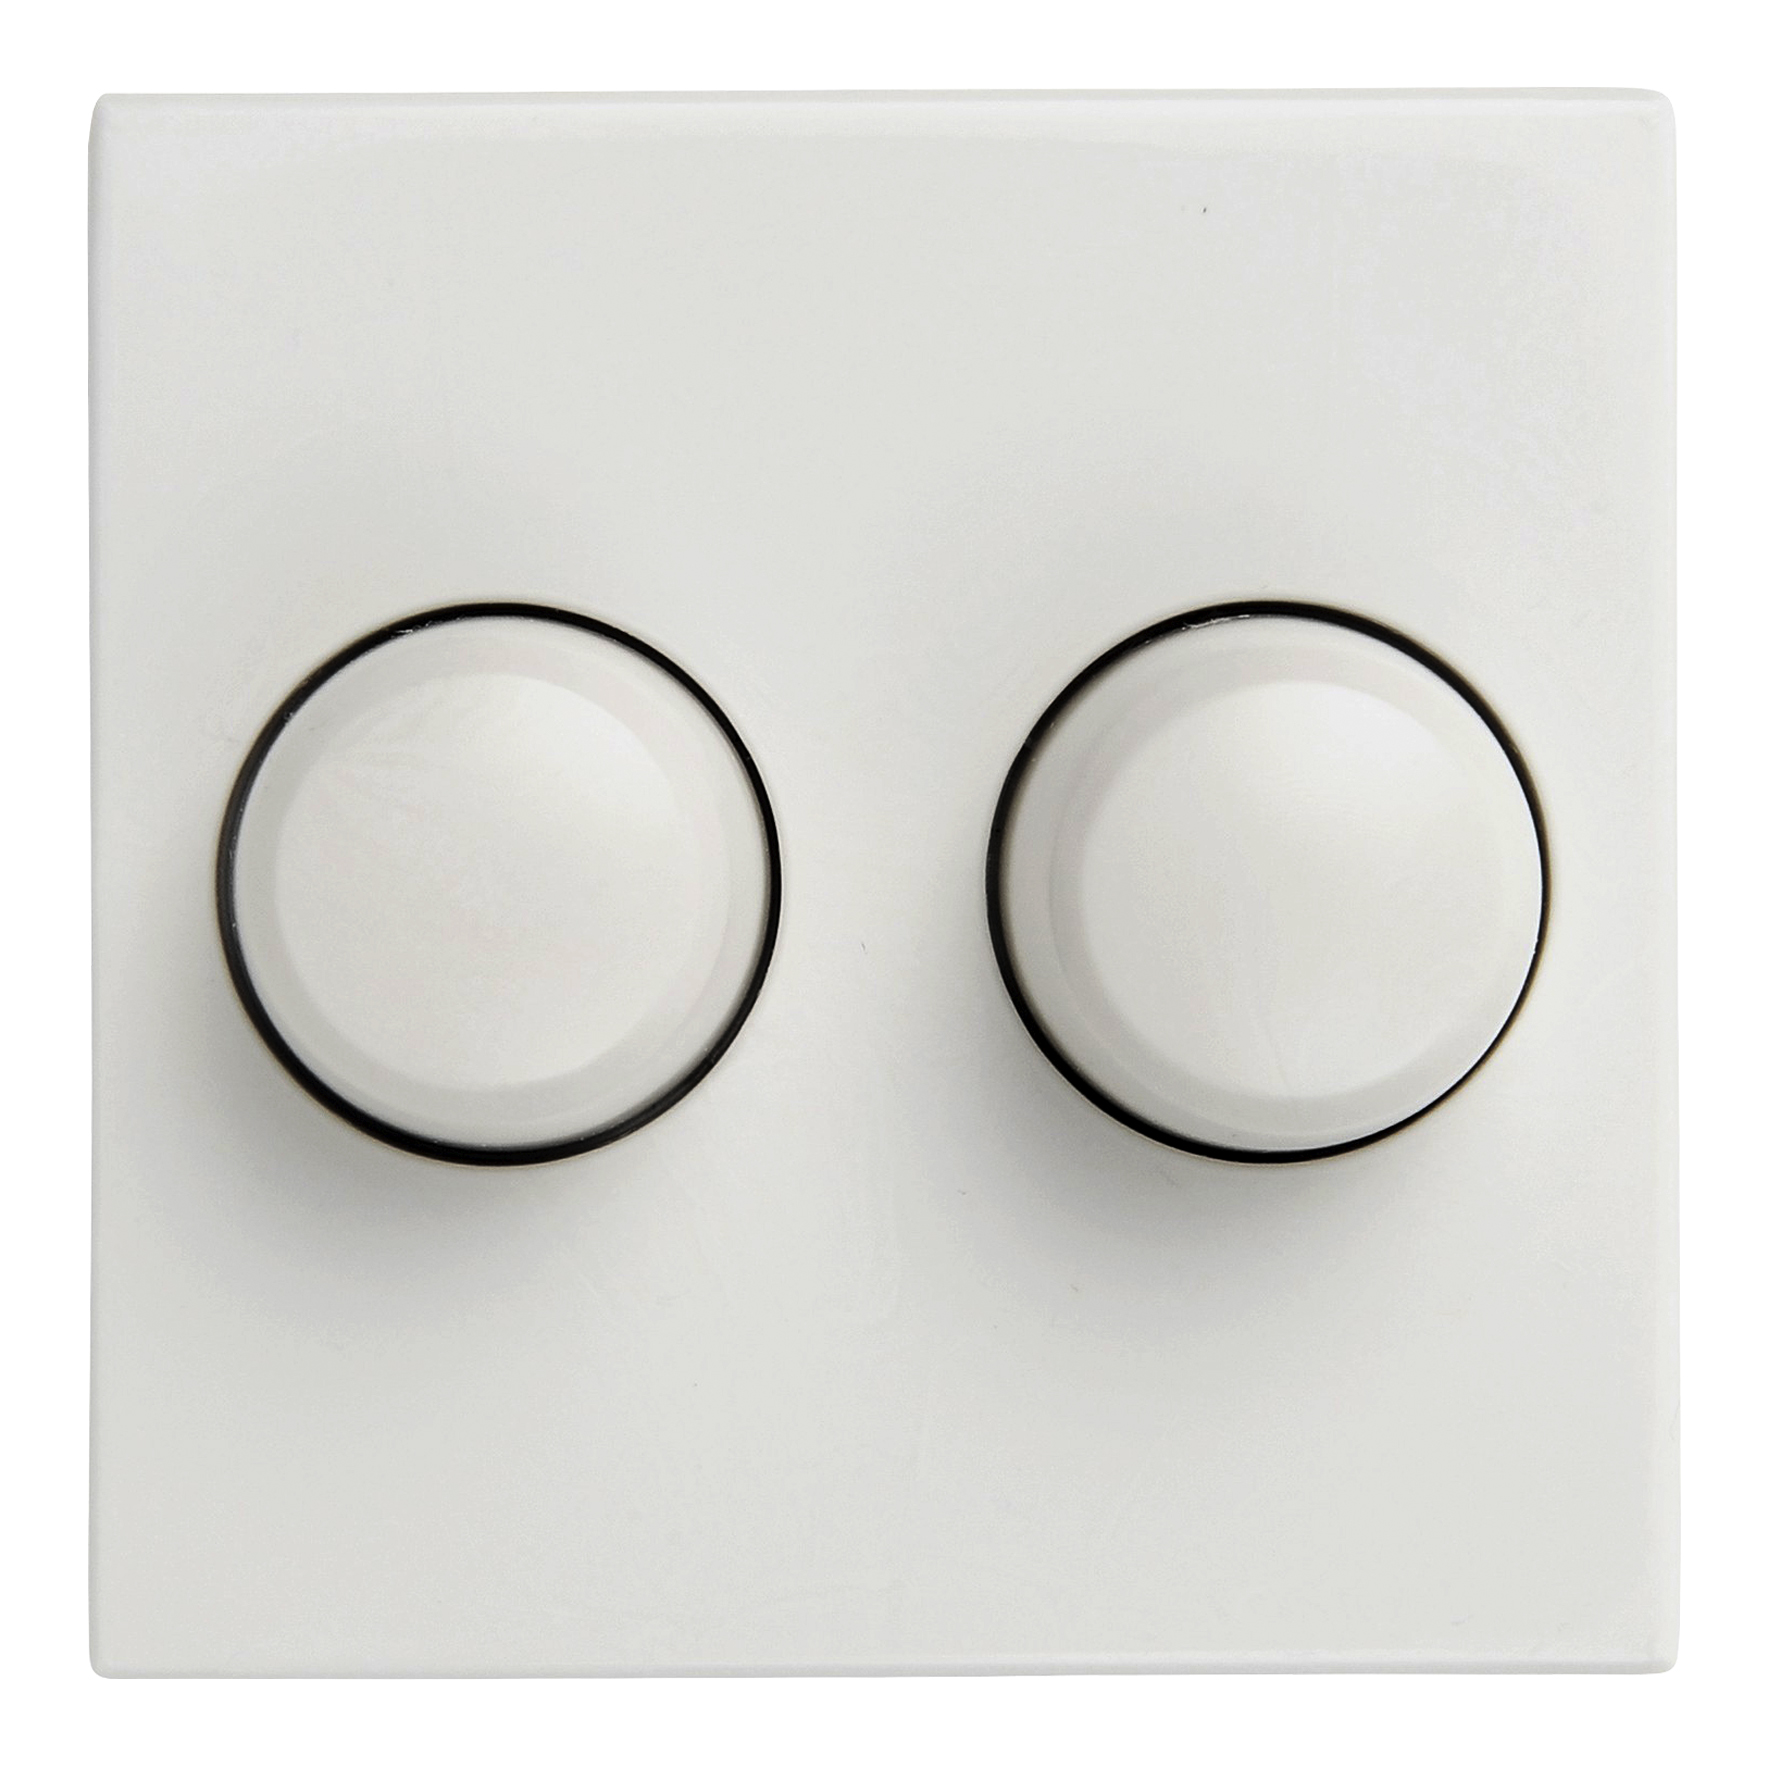 Cover plate duo dimmer